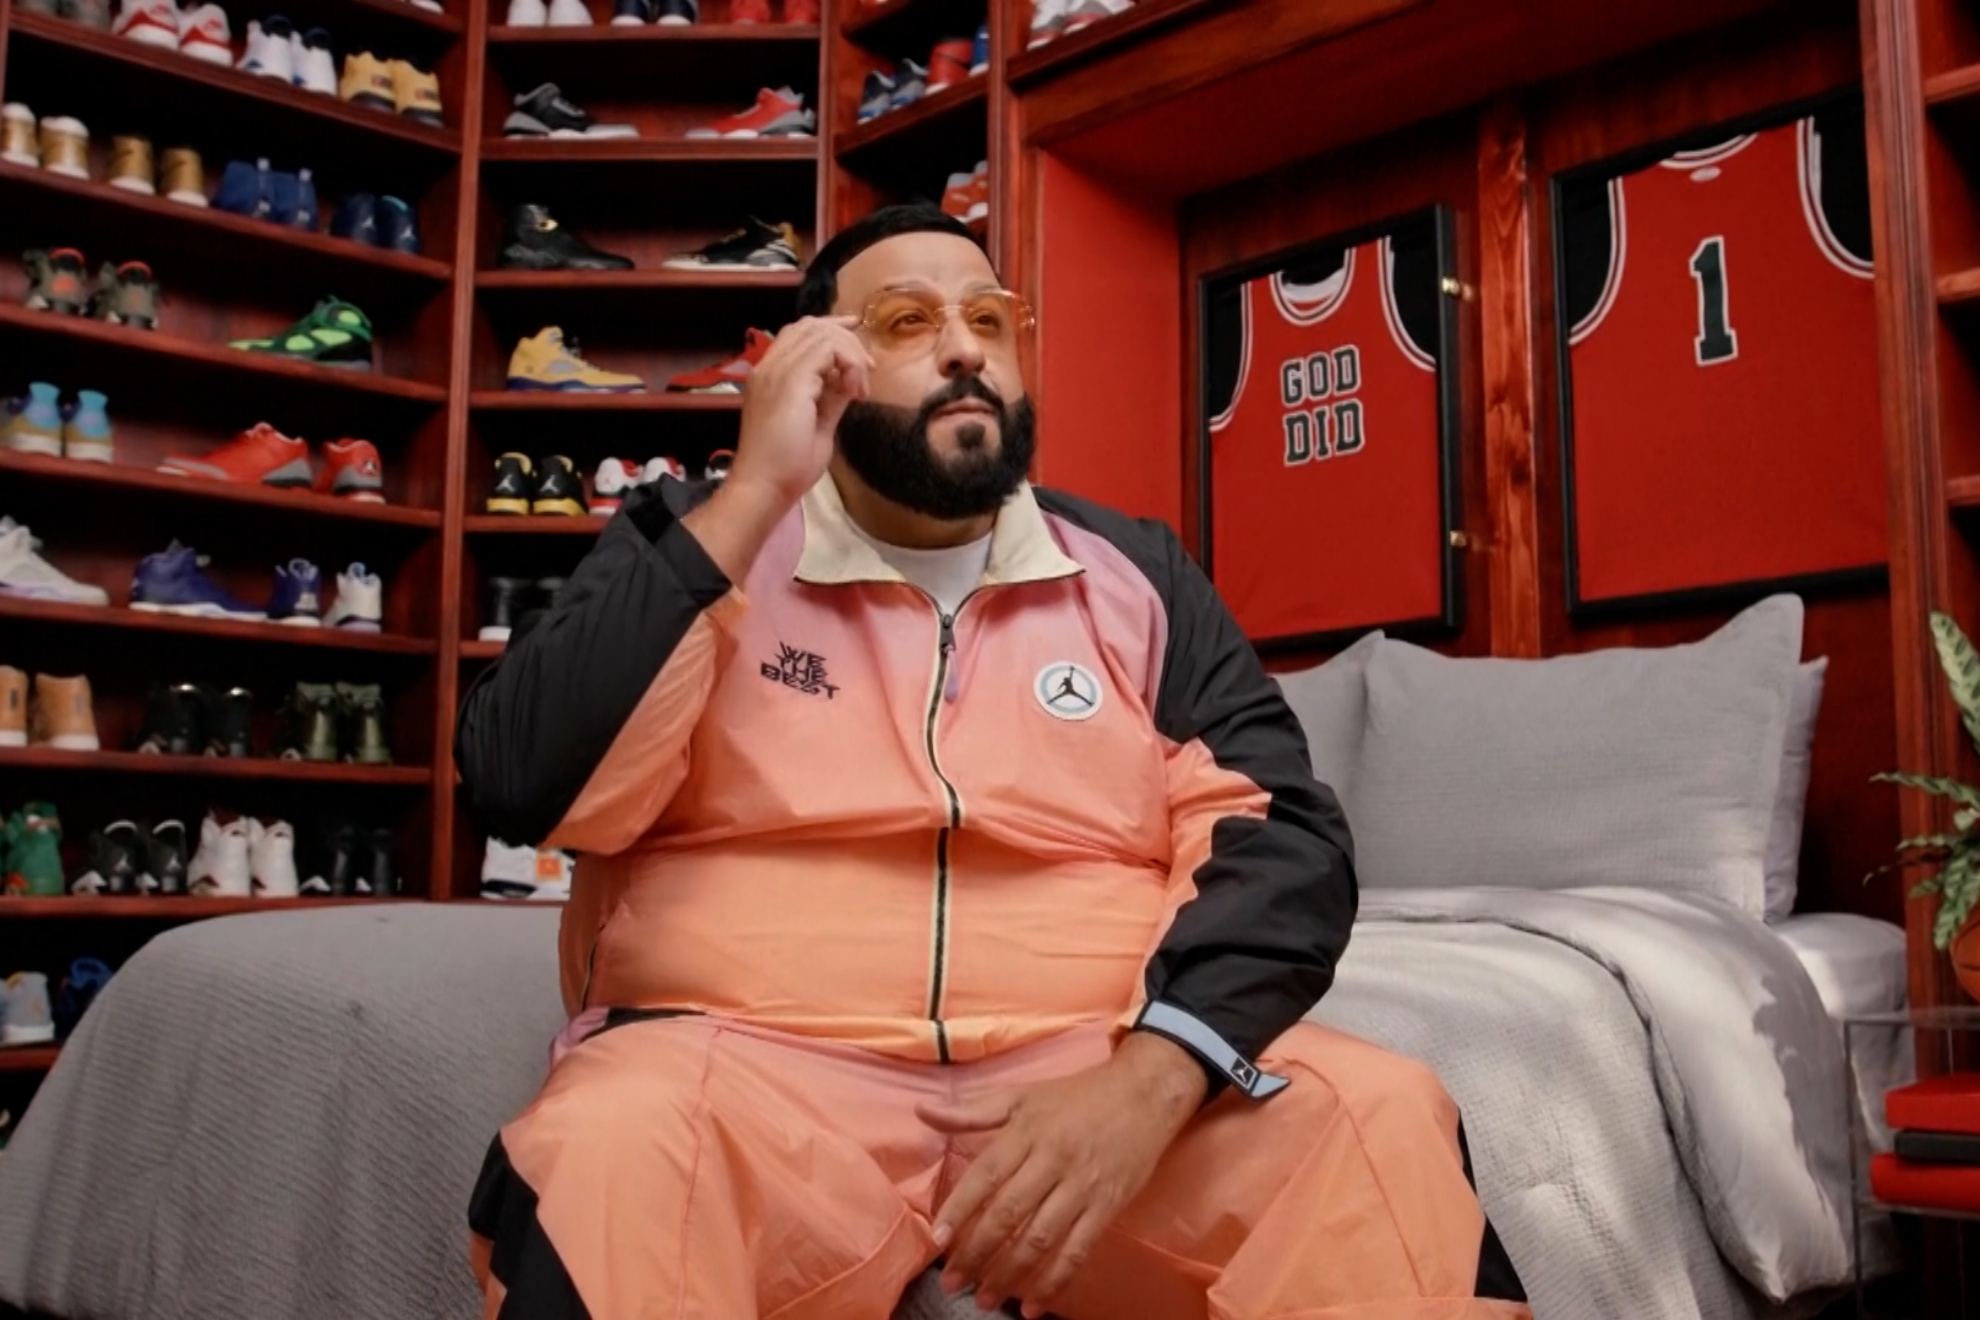 You Can Stay in DJ Khaled's Sneaker Closet for Just $11 a Night